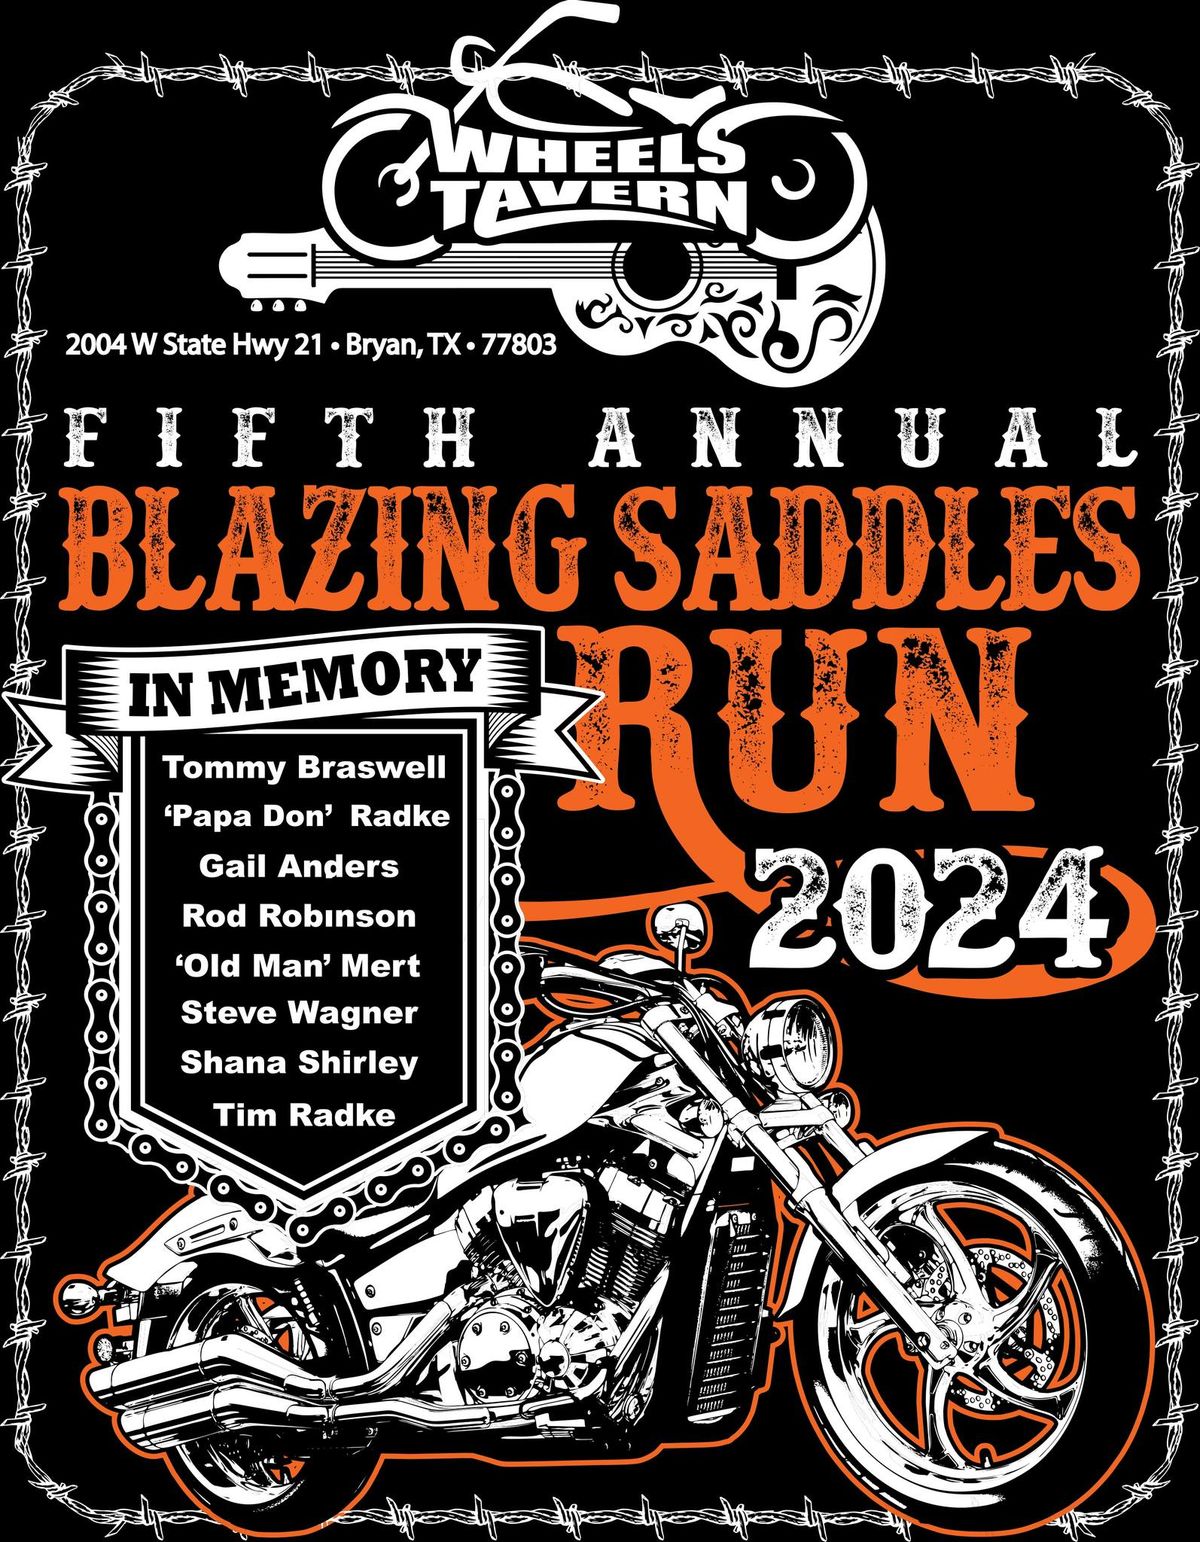 5th Annual Blazing Saddles Fun Run (SAVE THE DATE) MORE DEATILS TO COME